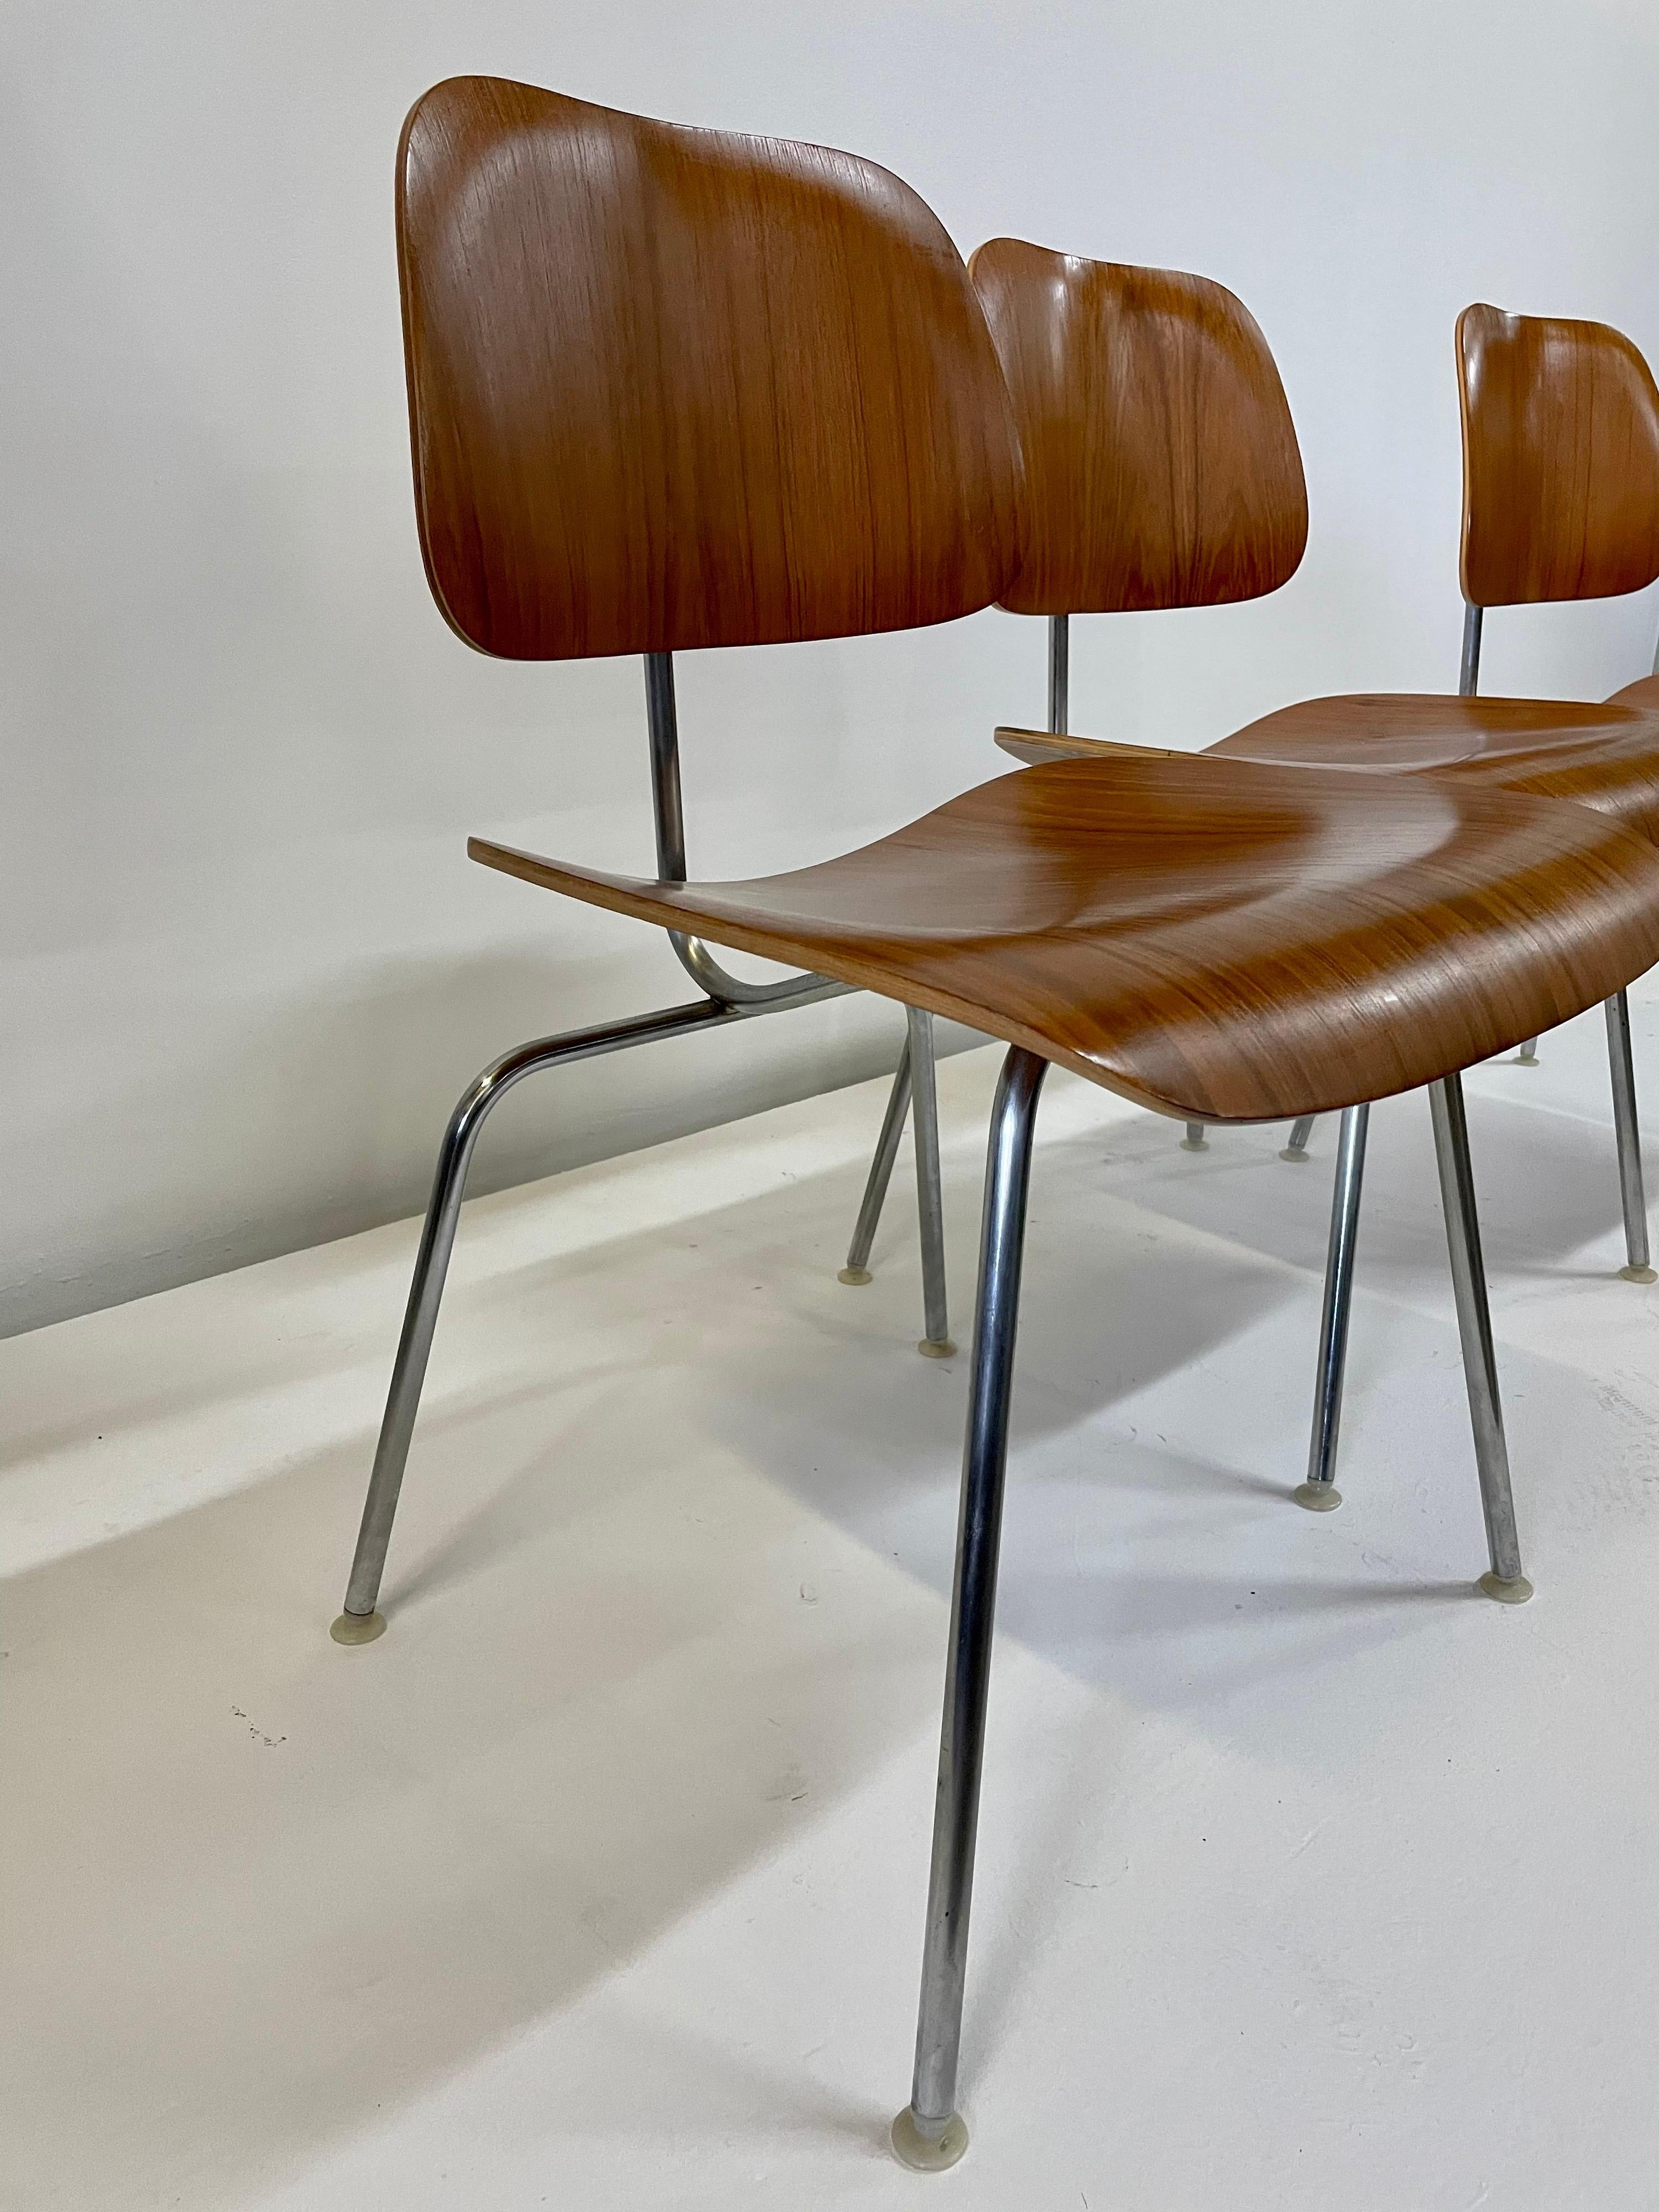 Steel Rare Early Set of Charles and Ray Eames for Herman Miller Chairs in Zebrawood For Sale